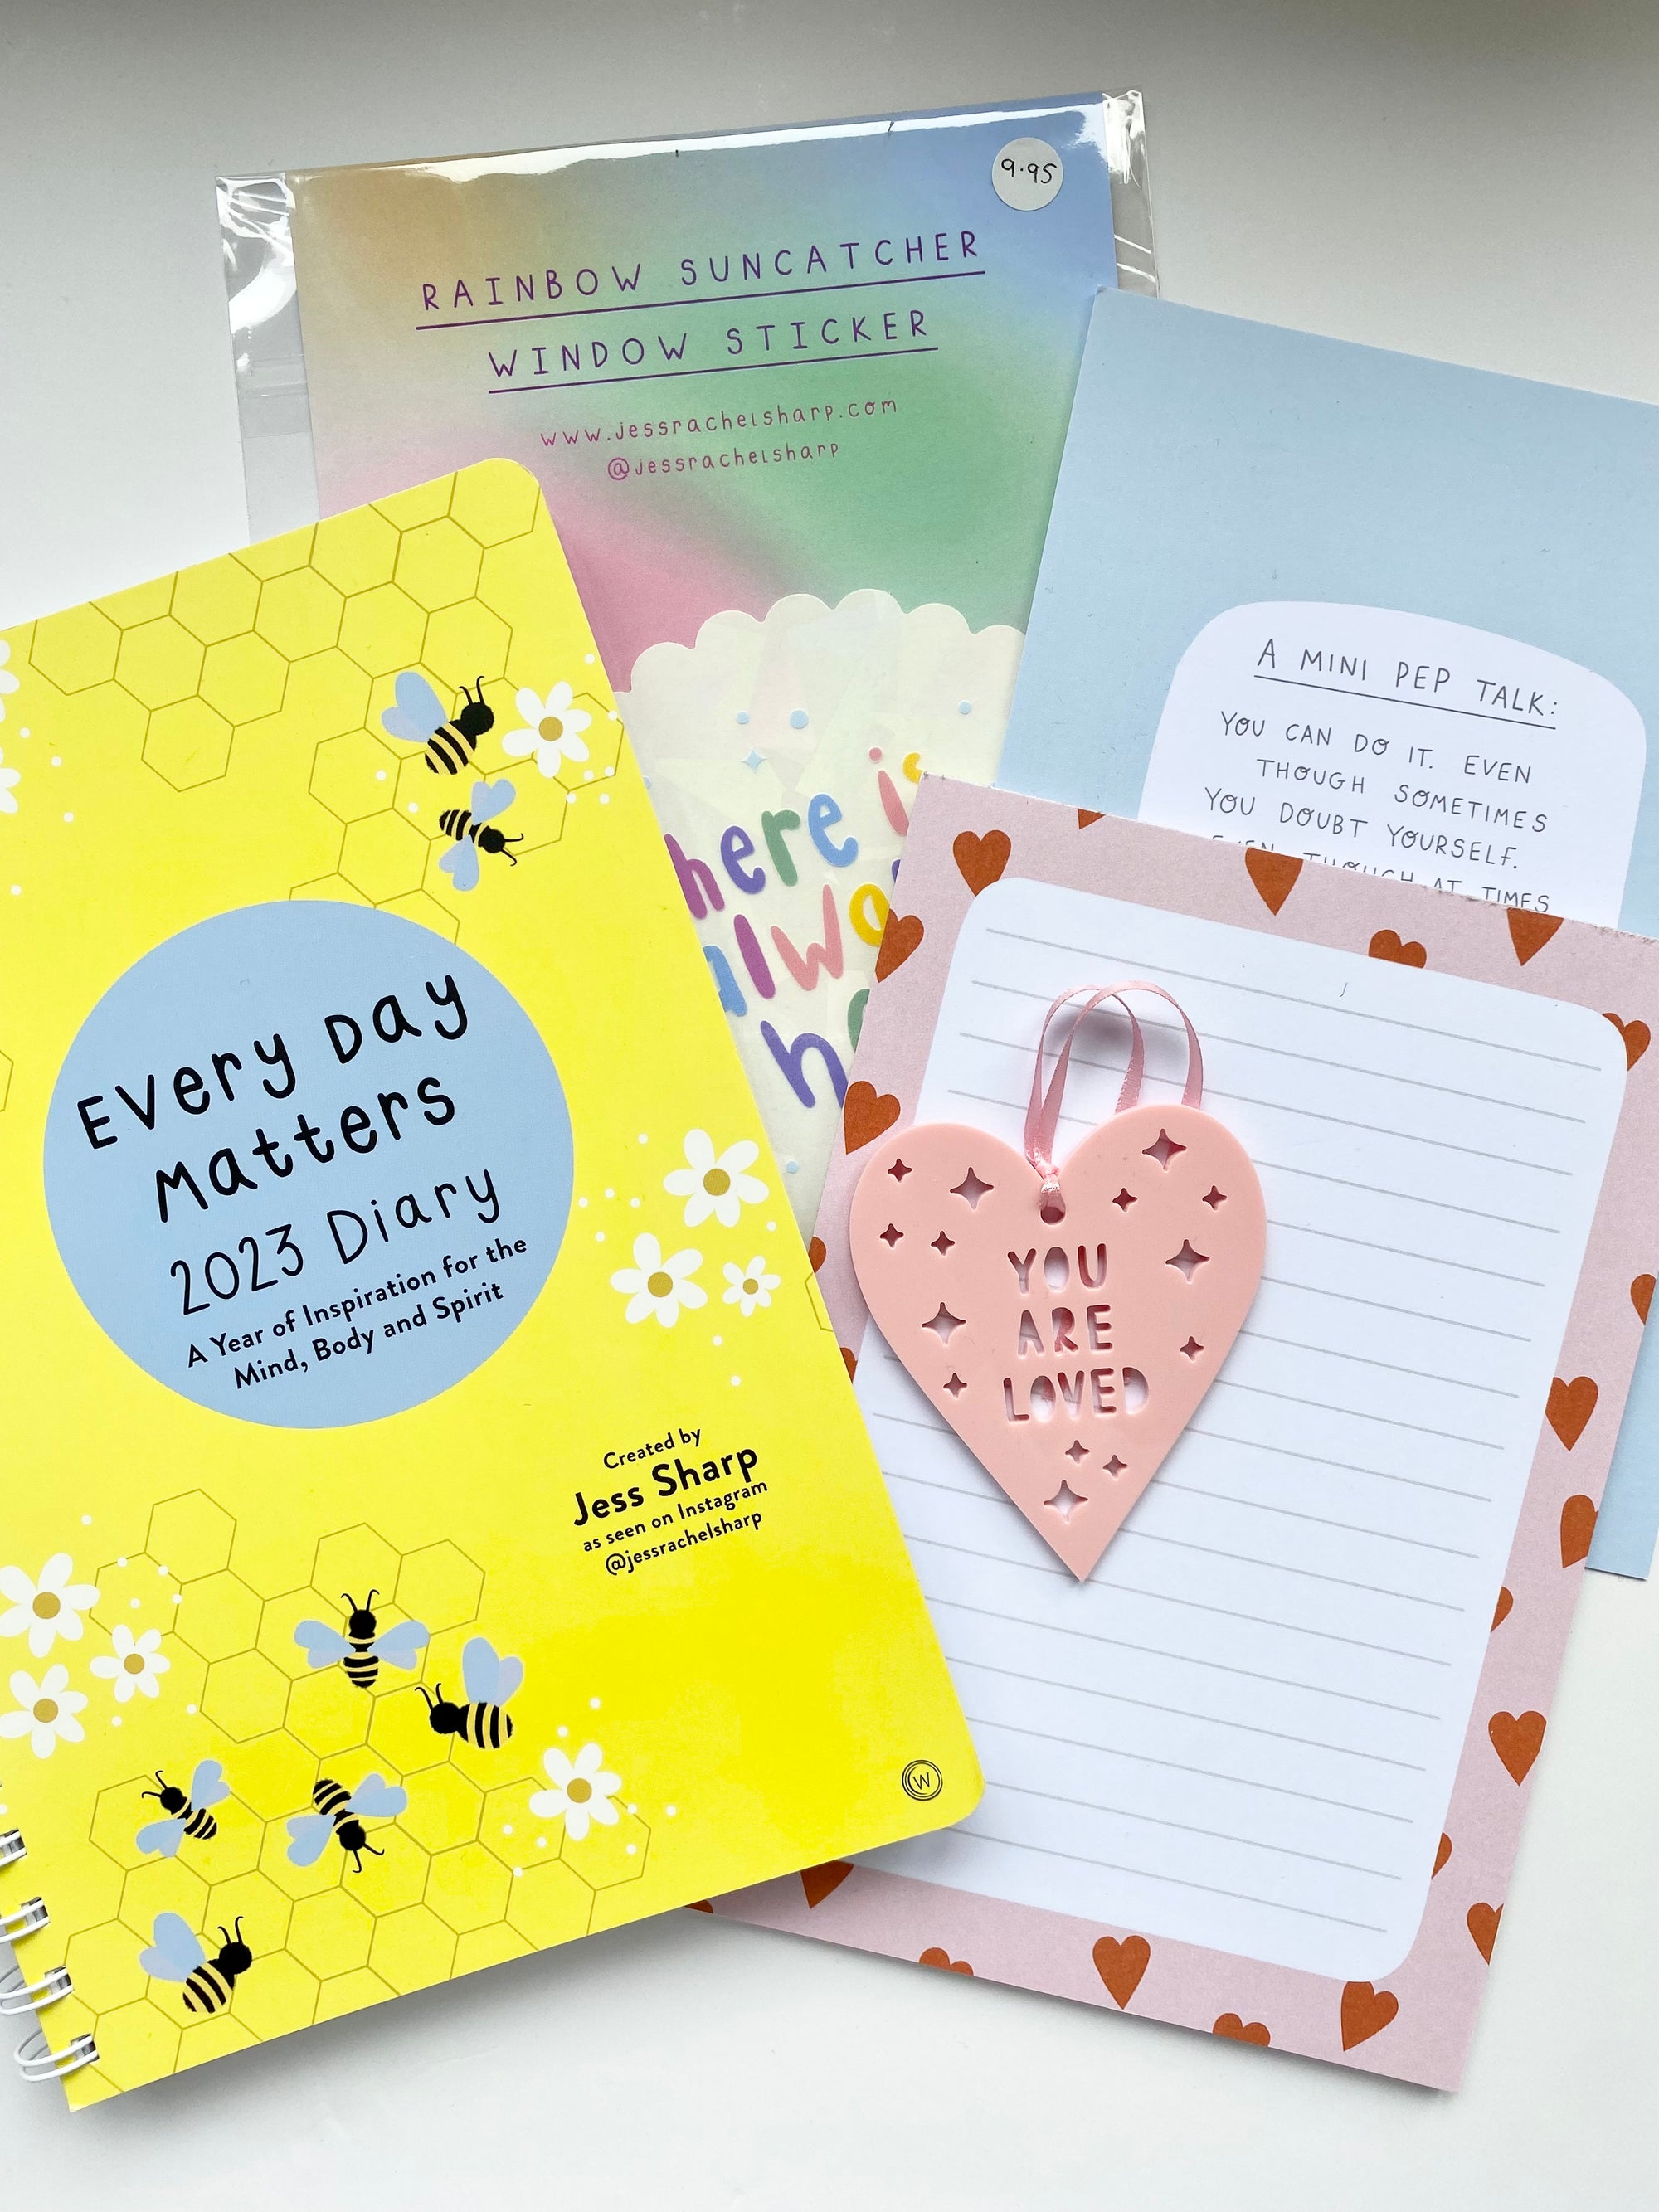 Every Day Matters Desk Diary SALE BOX